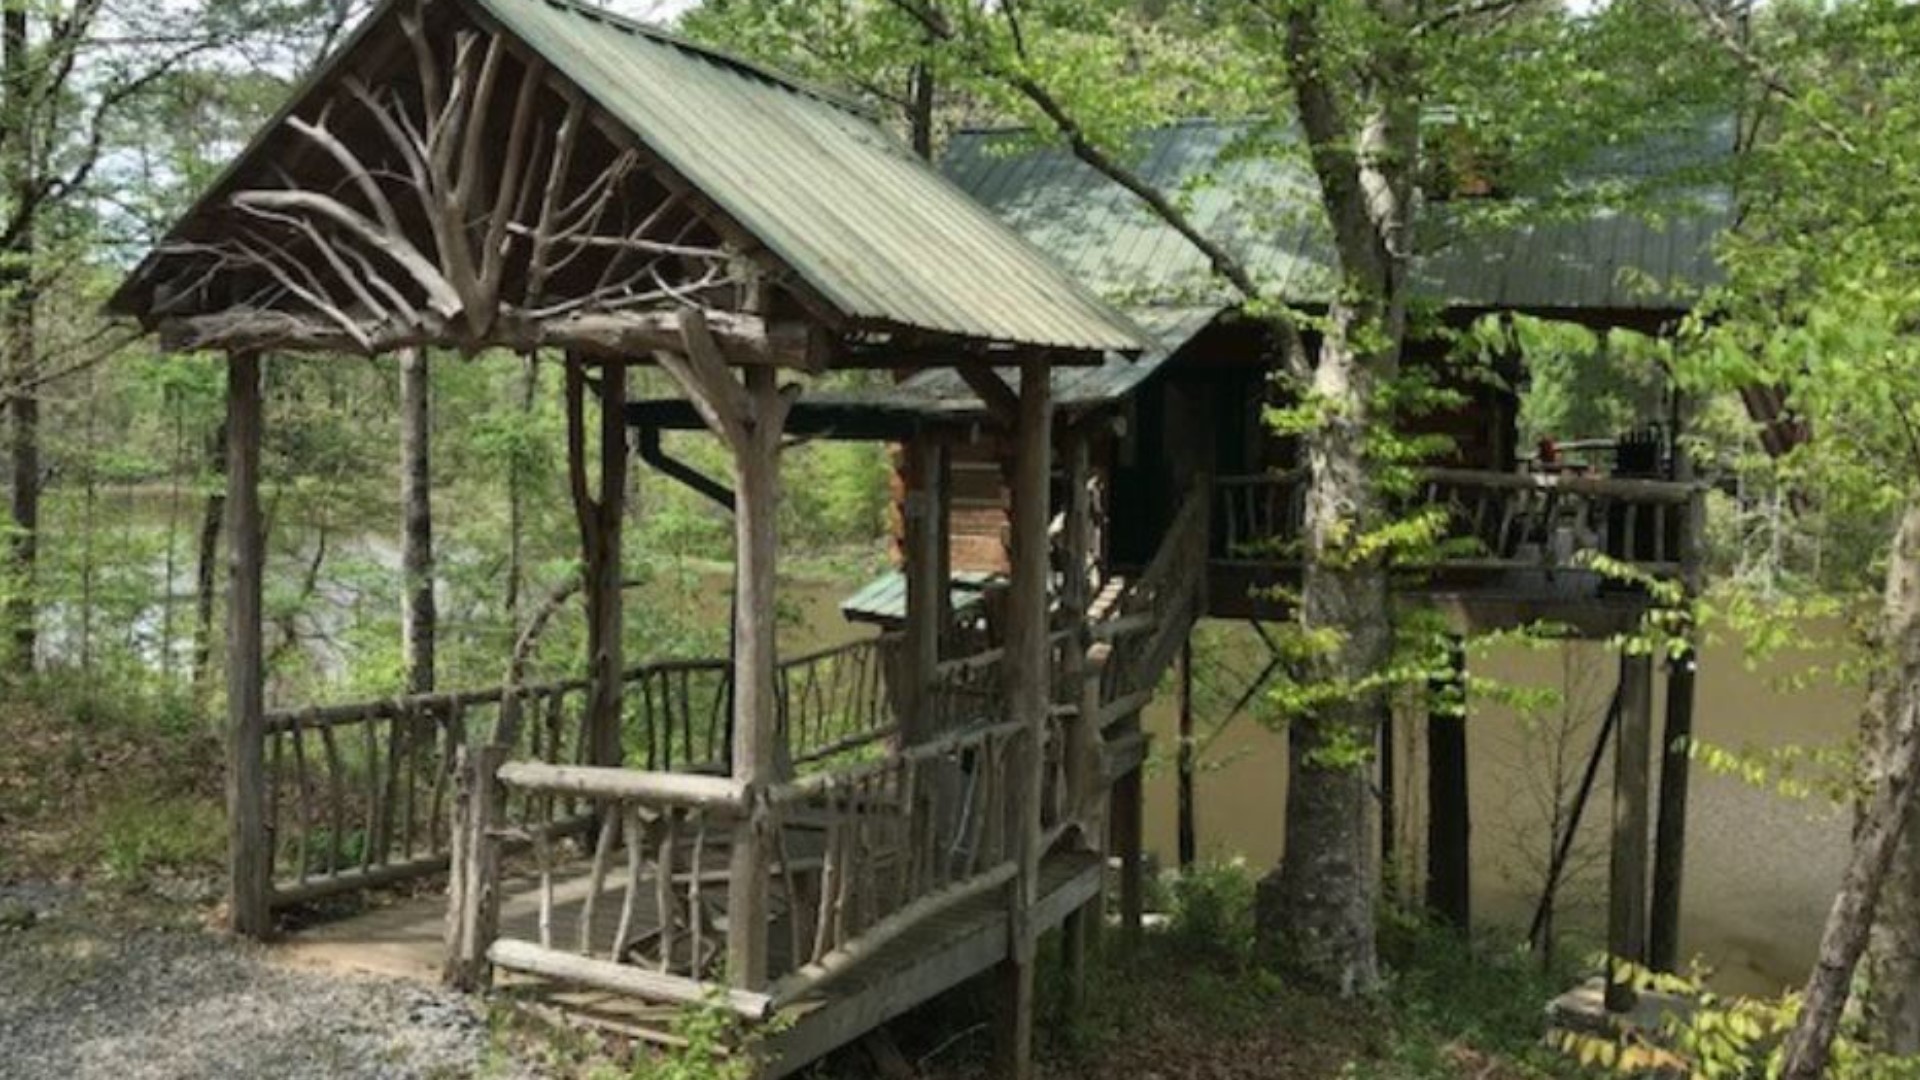 Get back to your childhood at this this treehouse hideaway in Jackson. It has 15-foot Cathedral ceilings, a hot tub, and boats are included in the rental